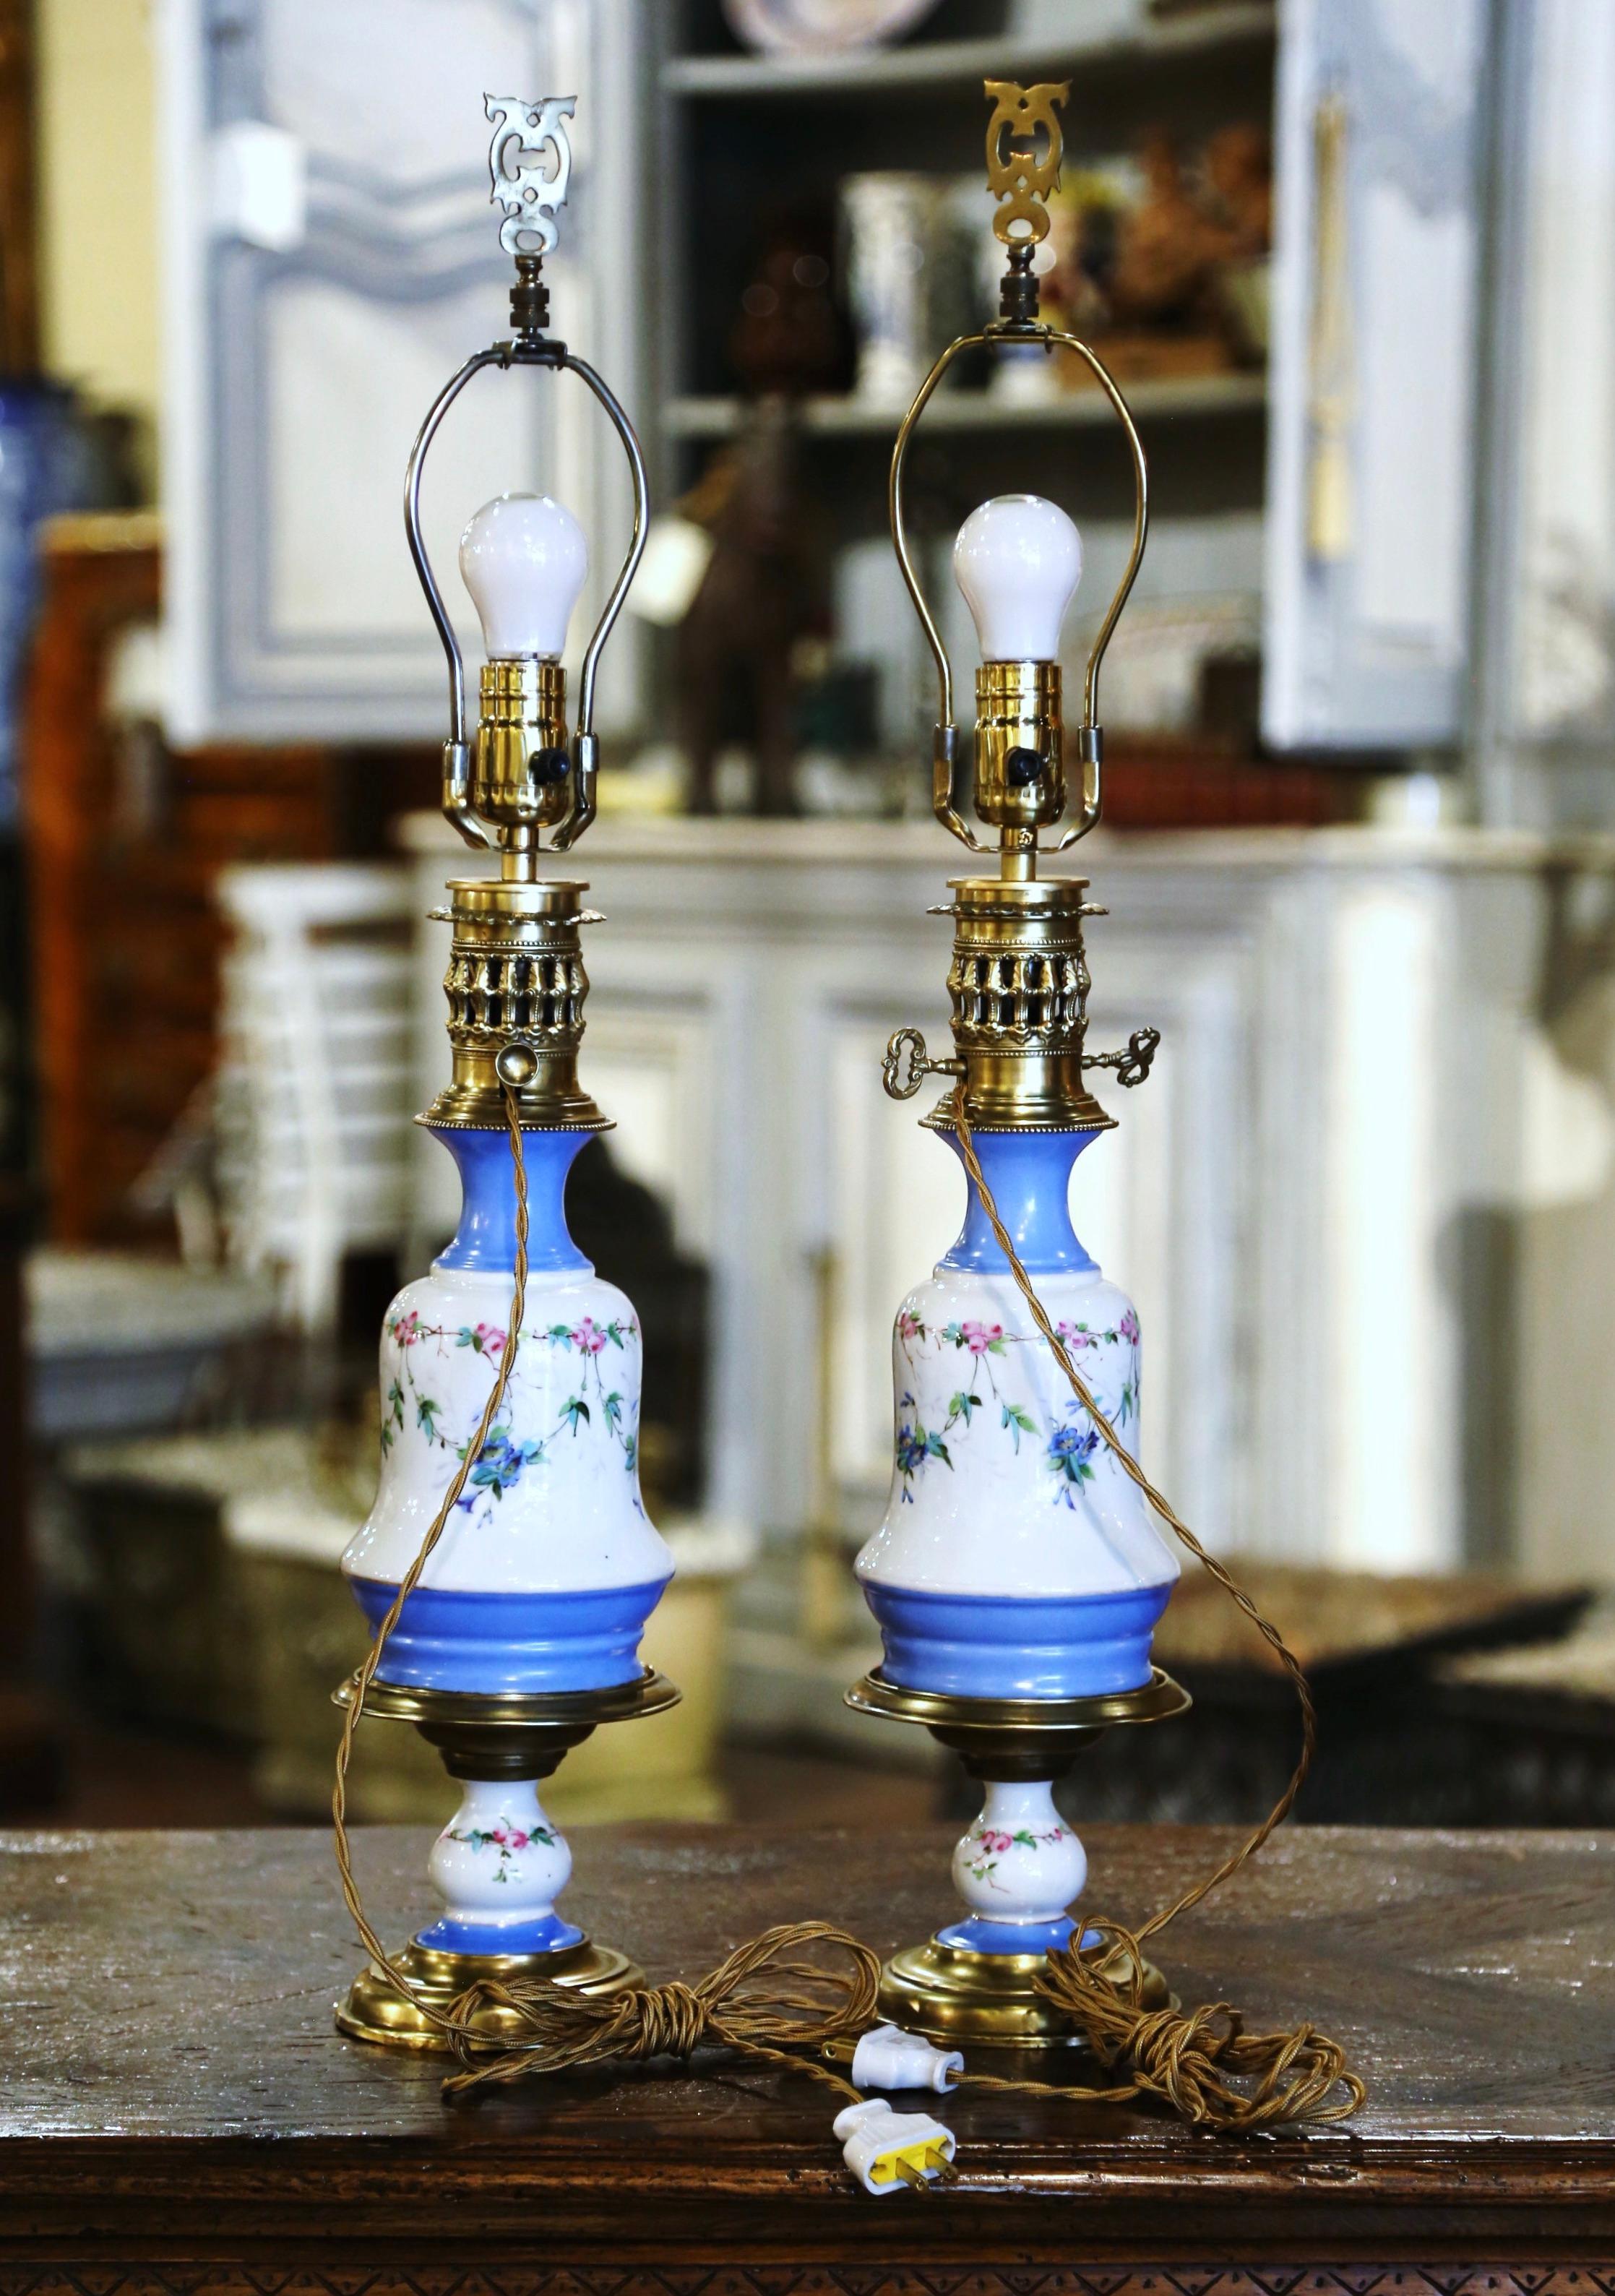 Pair of 19th Century French Porcelain & Brass Table Oil Lamps with Floral Motif For Sale 6